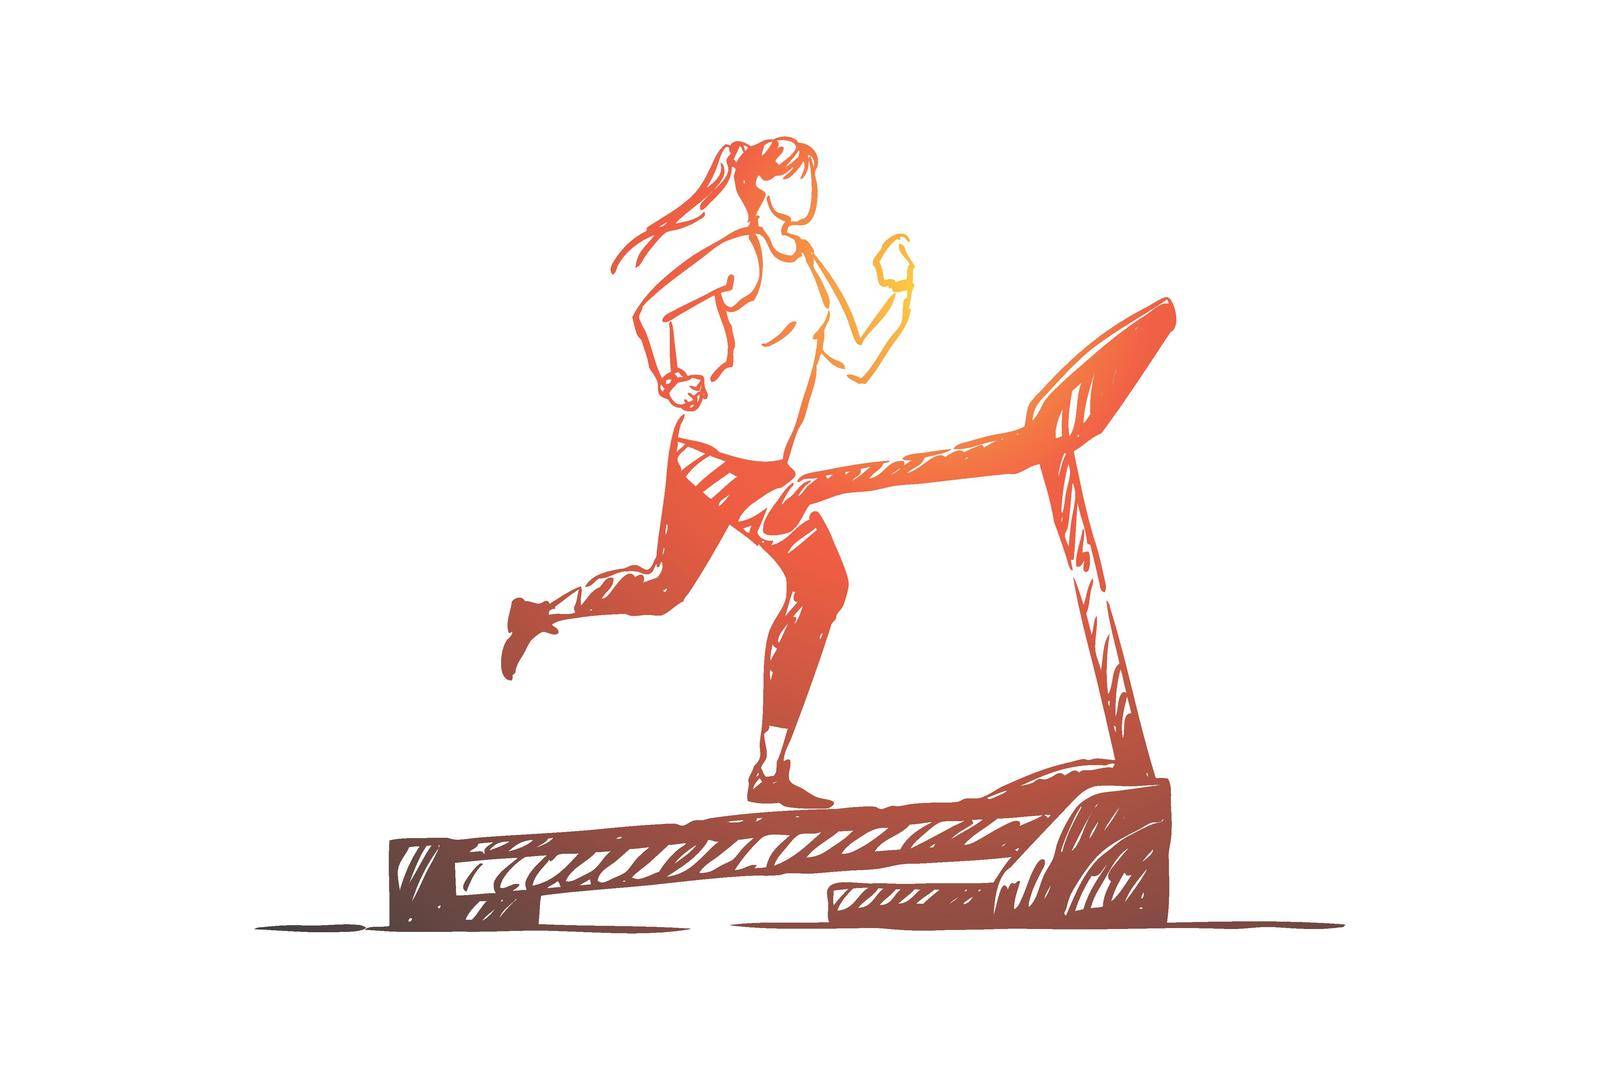 Sportswoman on running track, young woman using training apparatus for jogging, treadmill workout. Fitness exercise, sport club equipment concept sketch. Hand drawn vector illustration